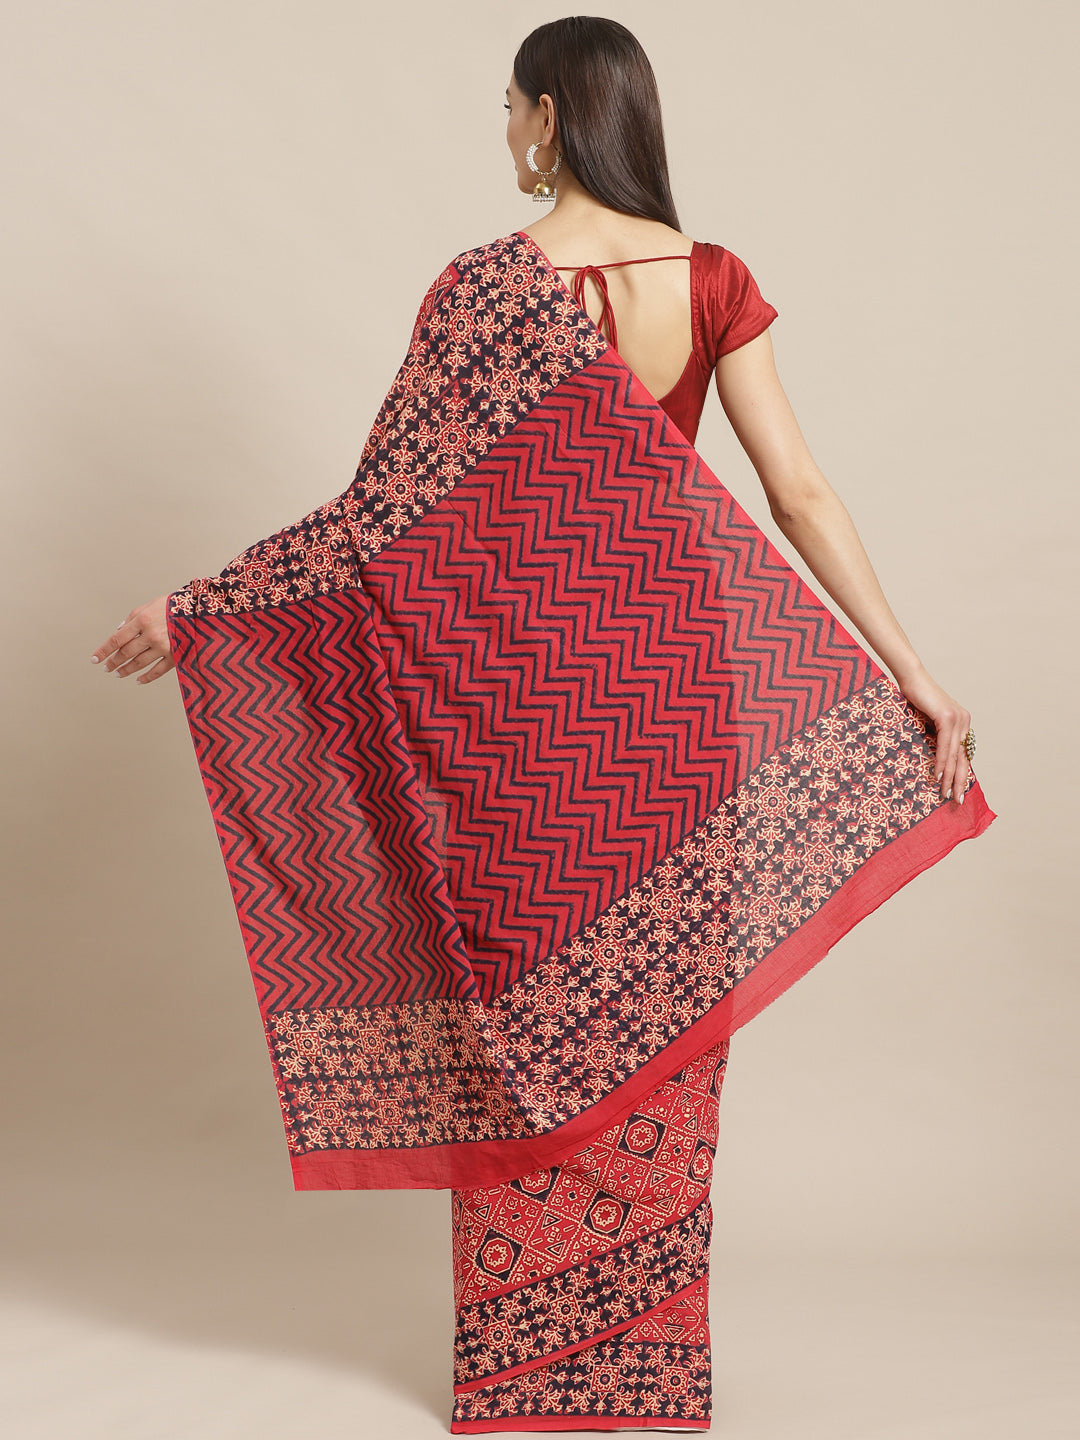 Red and Black, Kalakari India Pure Cotton Handblock Printed Saree and Blouse RCBGSA0020-Saree-Kalakari India-RCBGSA0020-Cotton, Geographical Indication, Hand Block, Hand Crafted, Heritage Prints, Natural Dyes, Red, Sarees, Sustainable Fabrics, Woven, Yellow-[Linen,Ethnic,wear,Fashionista,Handloom,Handicraft,Indigo,blockprint,block,print,Cotton,Chanderi,Blue, latest,classy,party,bollywood,trendy,summer,style,traditional,formal,elegant,unique,style,hand,block,print, dabu,booti,gift,present,glamoro